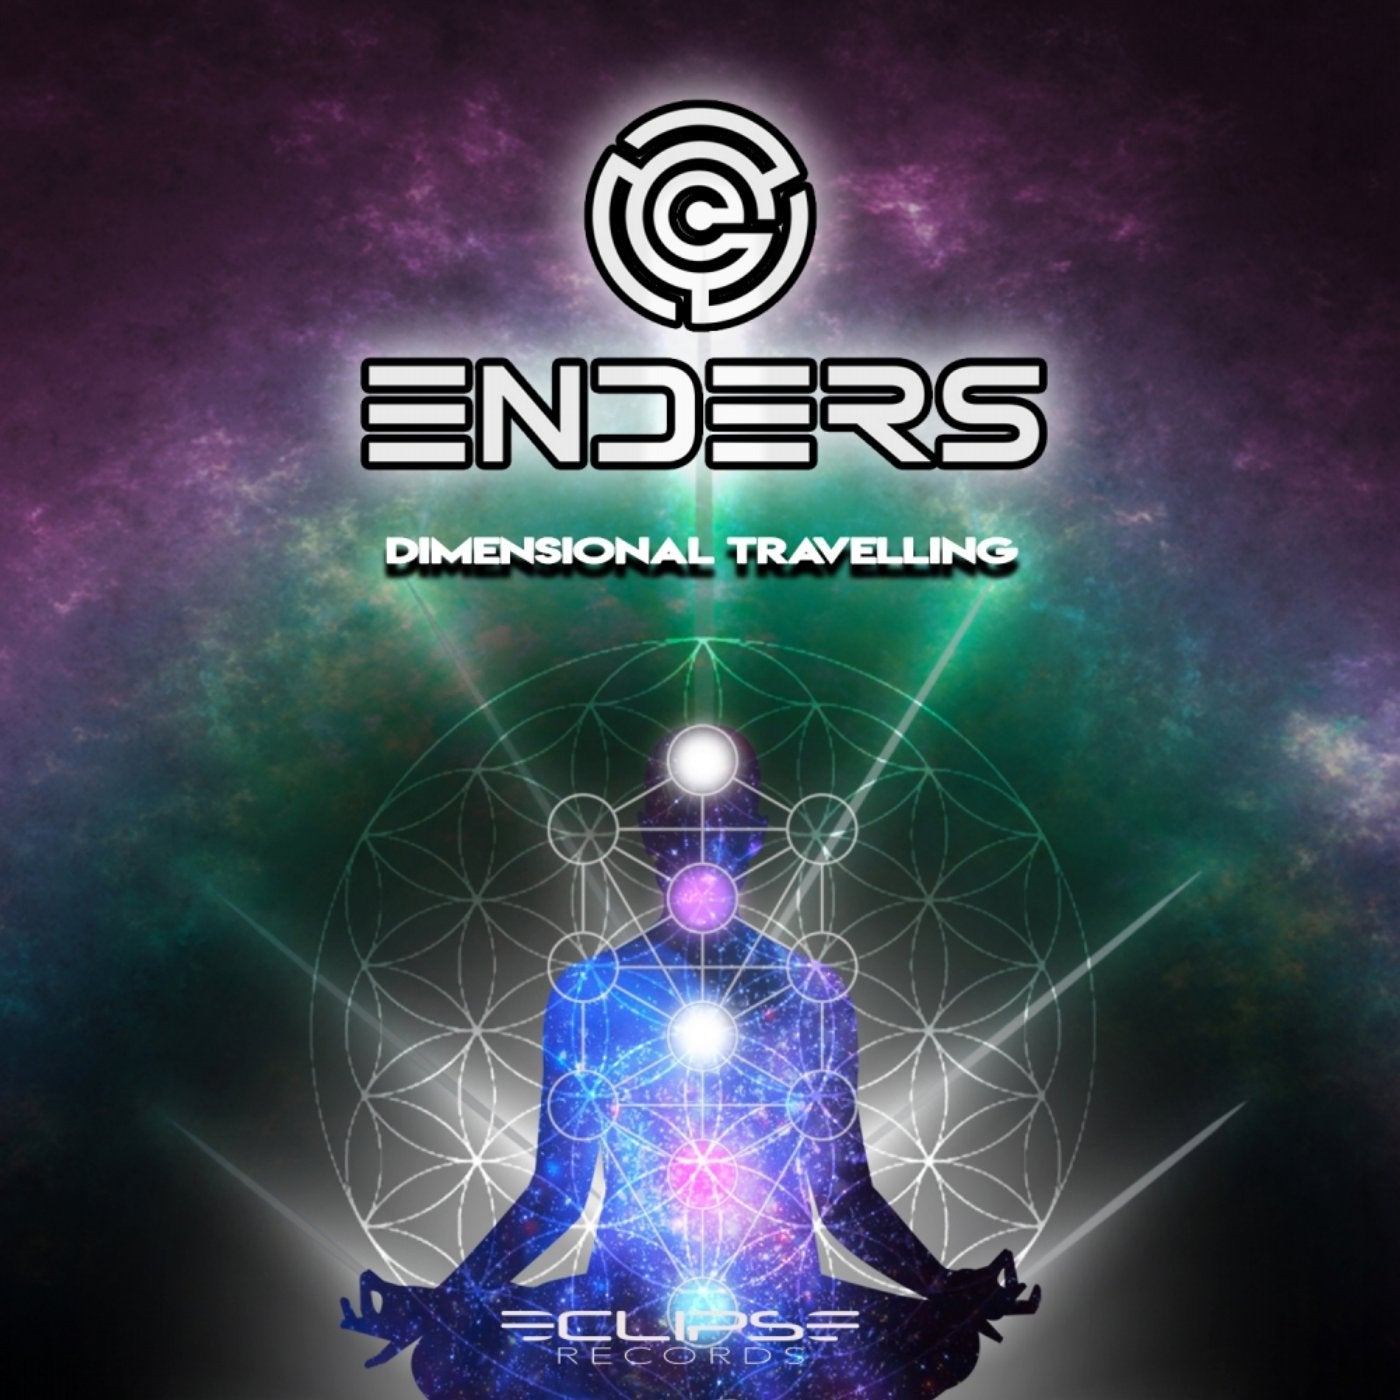 Eclipse Records artists & music download - Beatport